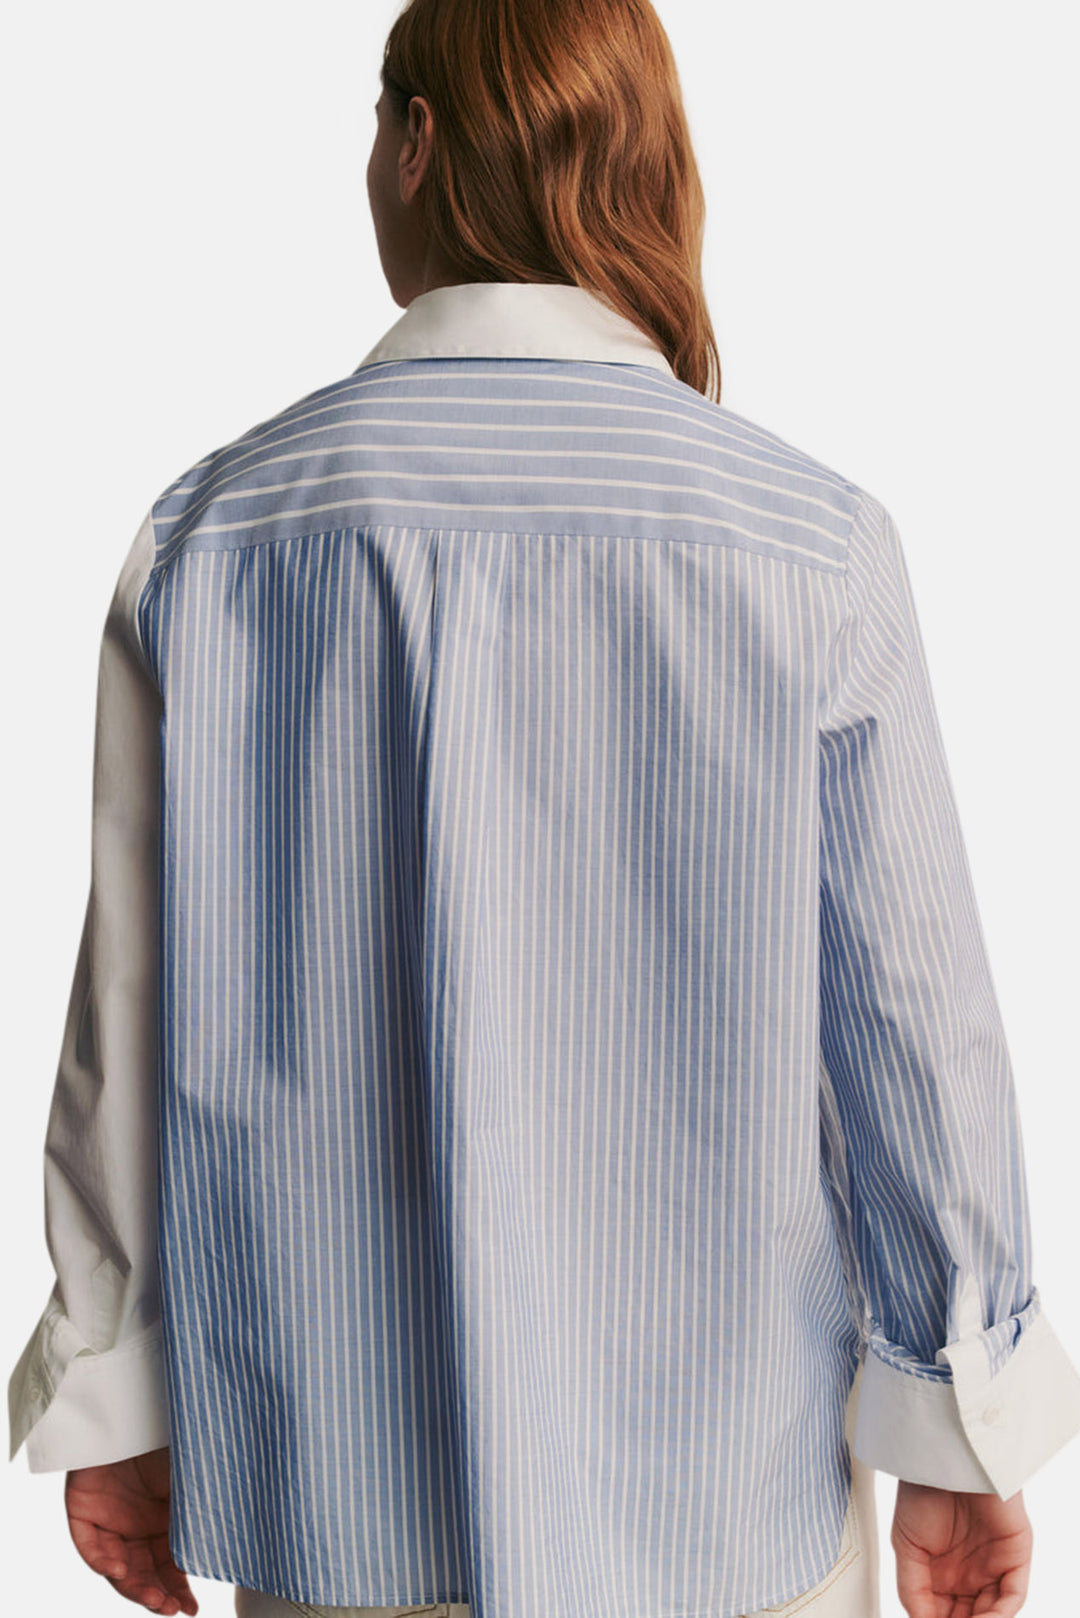 New Morning After Shirt In Combo Stripe Indigo/White